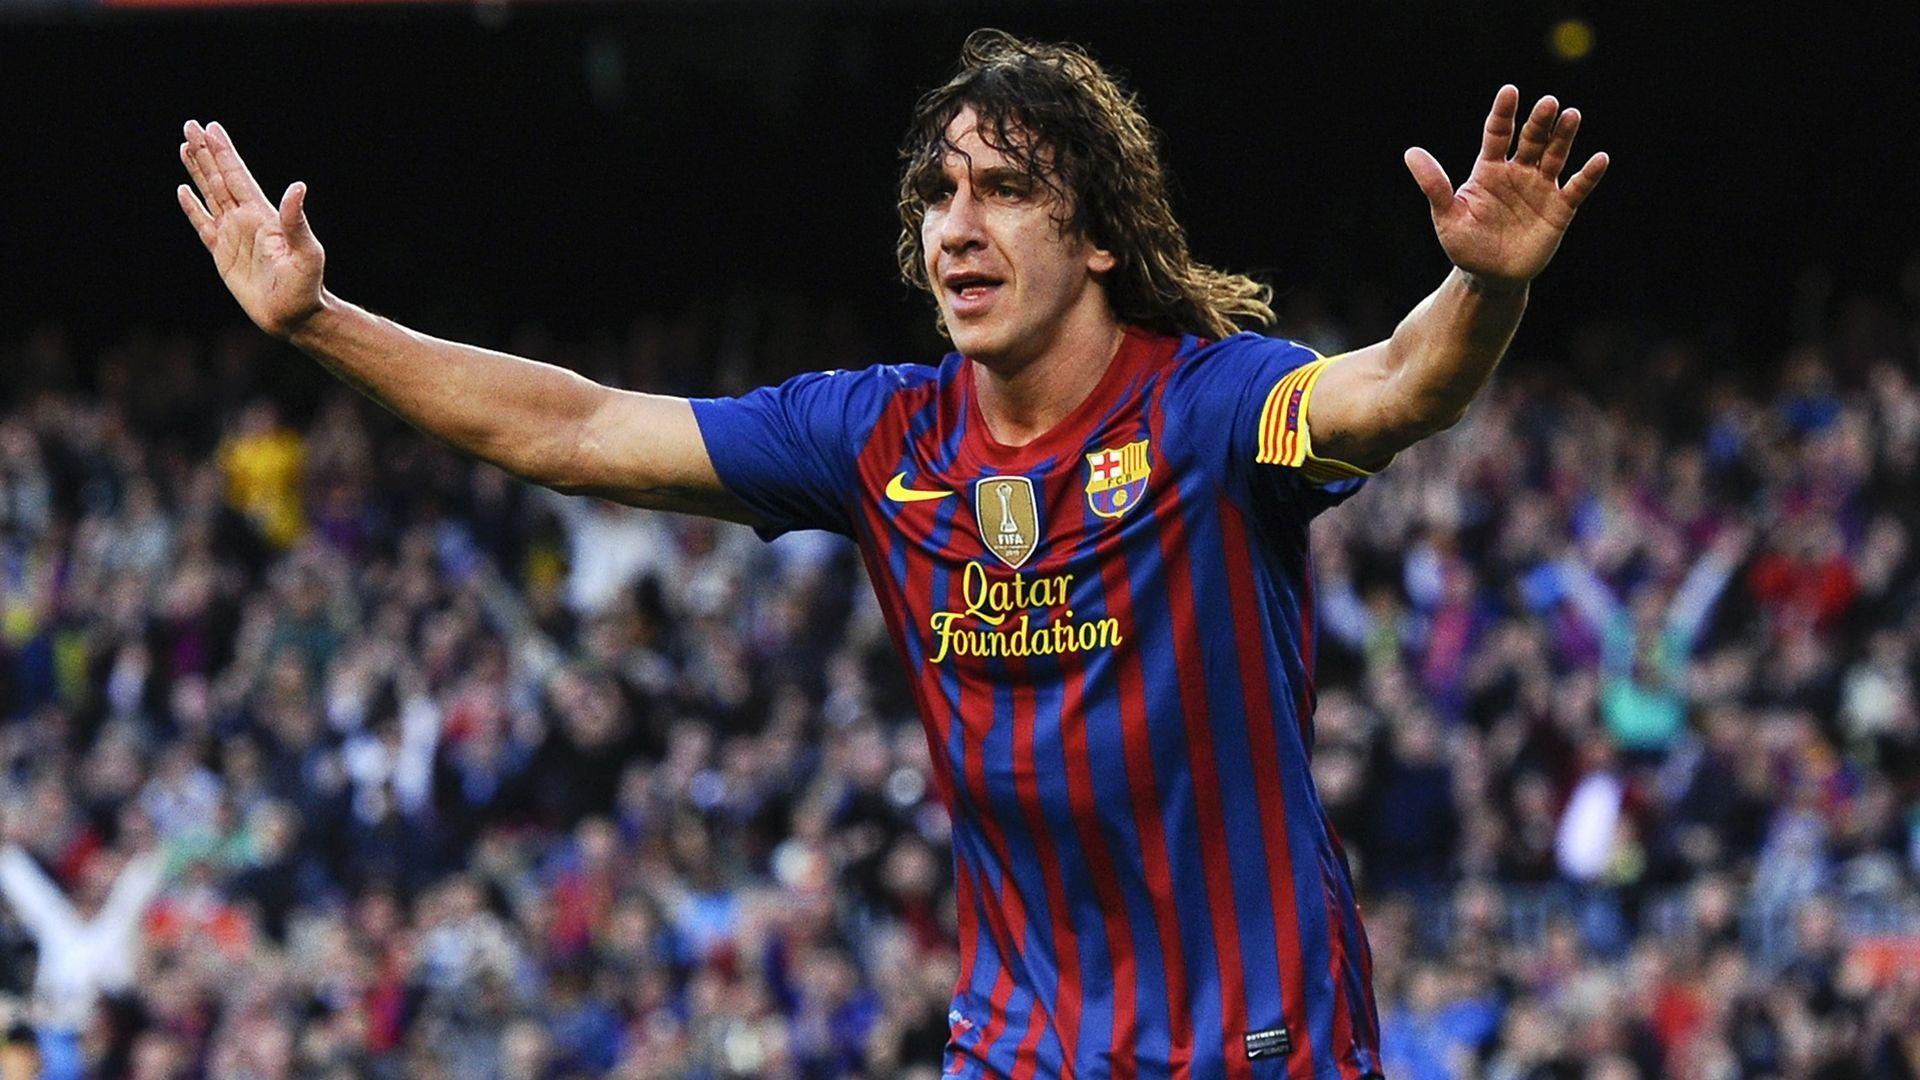 The player of Barcelona Carles Puyol wallpaper and image